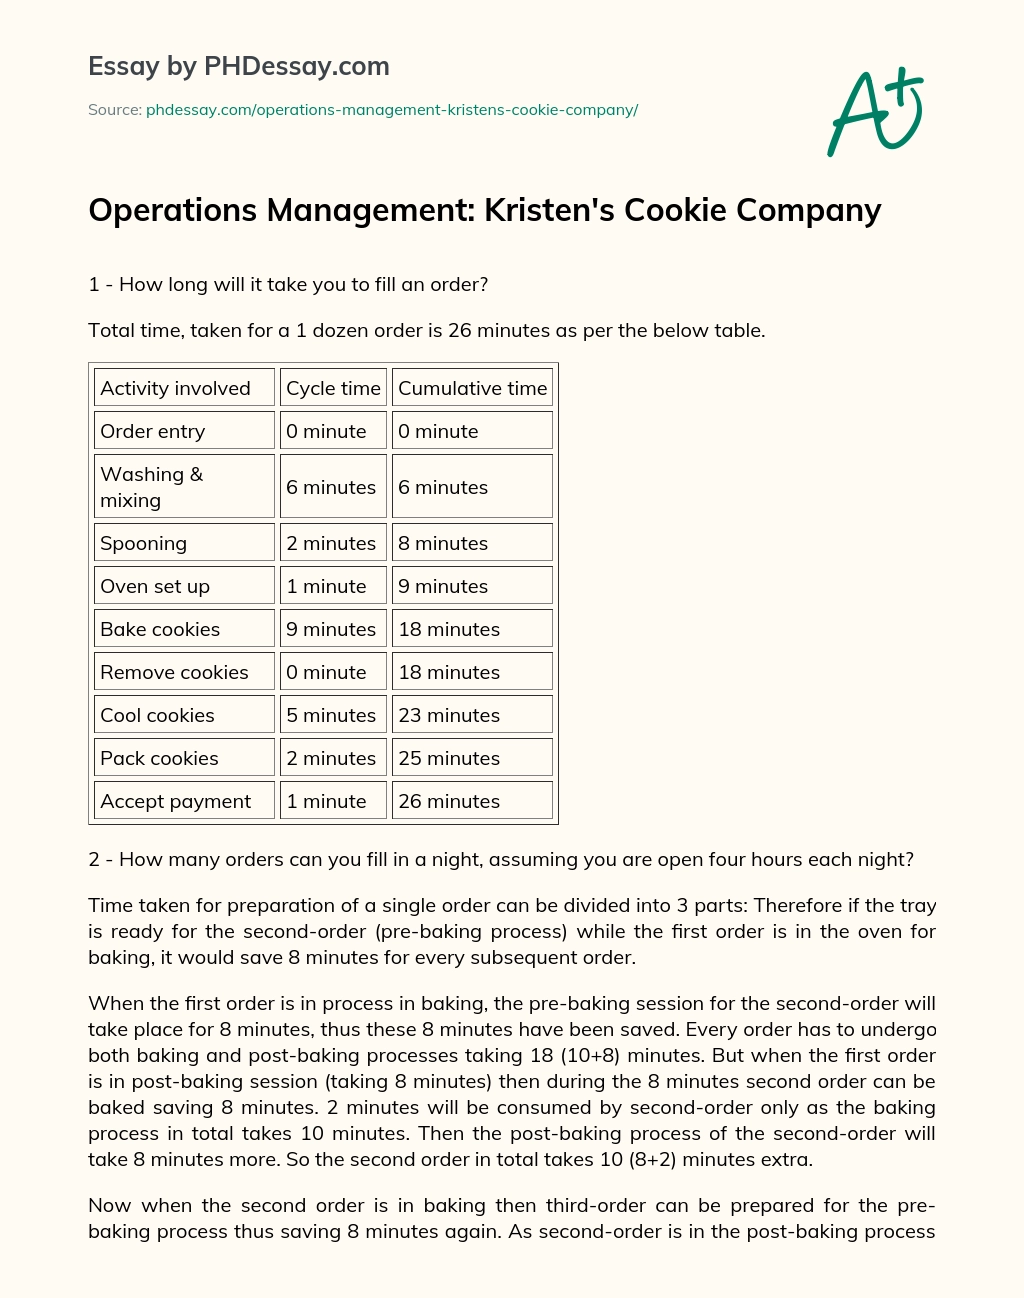 Operations Management: Kristen’s Cookie Company essay